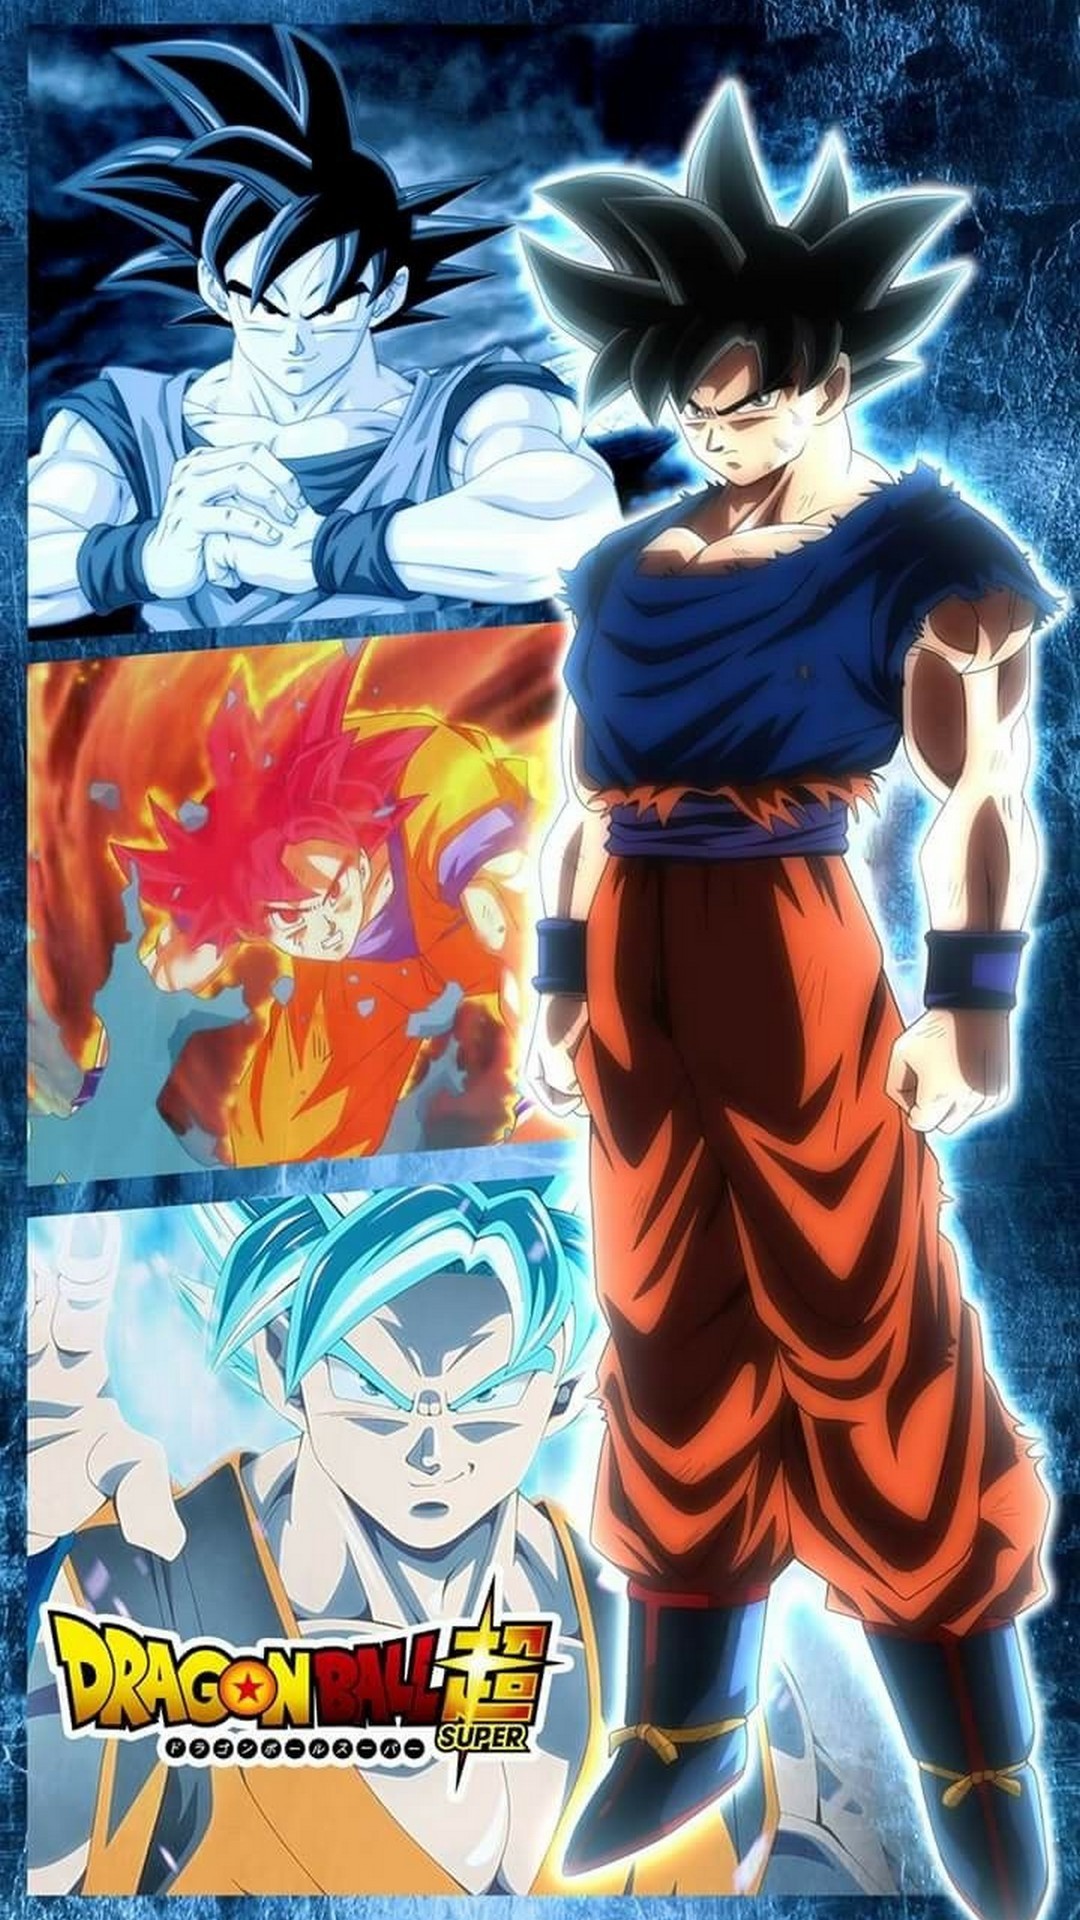 iPhone 8 Wallpaper Goku Imagenes with image resolution 1080x1920 pixel. You can make this wallpaper for your iPhone 5, 6, 7, 8, X backgrounds, Mobile Screensaver, or iPad Lock Screen